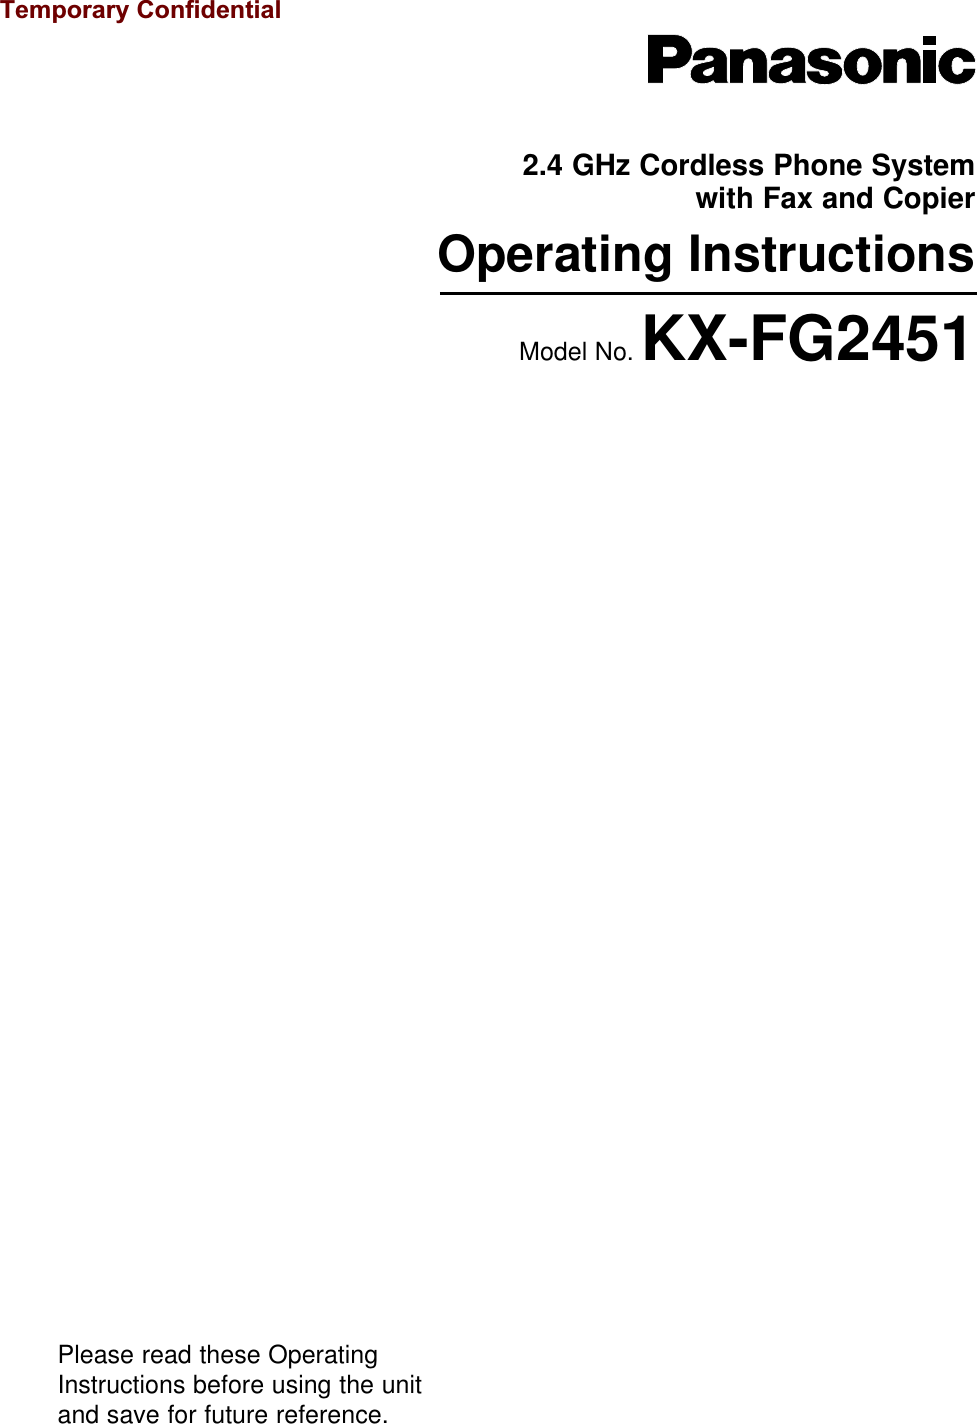 2.4 GHz Cordless Phone System with Fax and CopierOperating InstructionsModel No. KX-FG2451Please read these OperatingInstructions before using the unitand save for future reference.Temporary Confidential